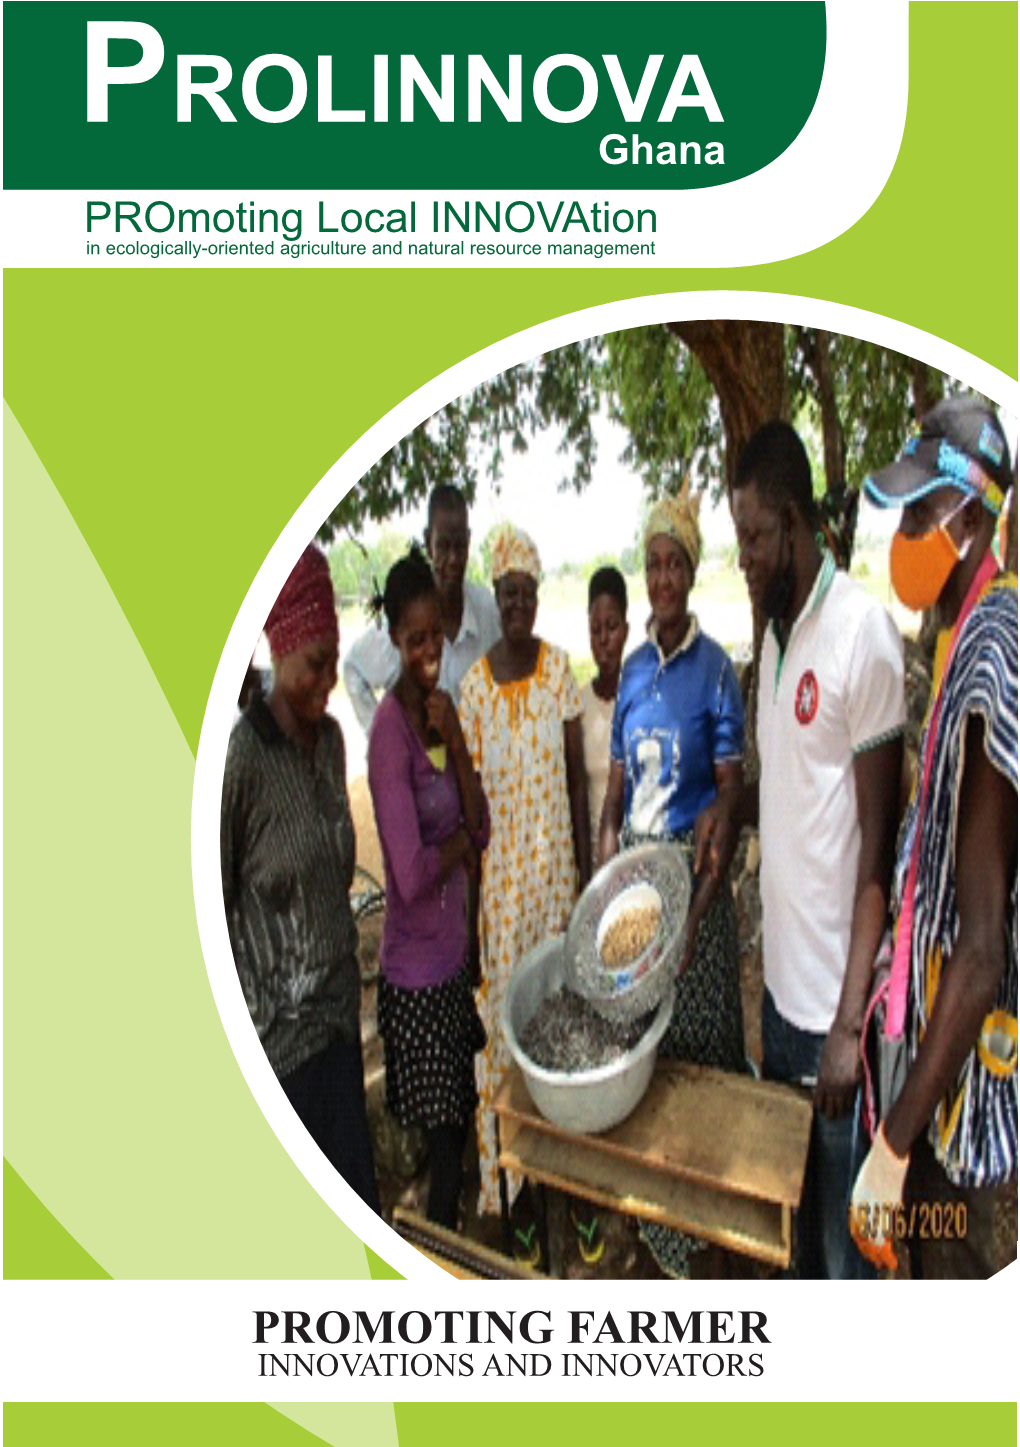 PROLINNOVA Ghana Promoting Local Innovation in Ecologically-Oriented Agriculture and Natural Resource Management